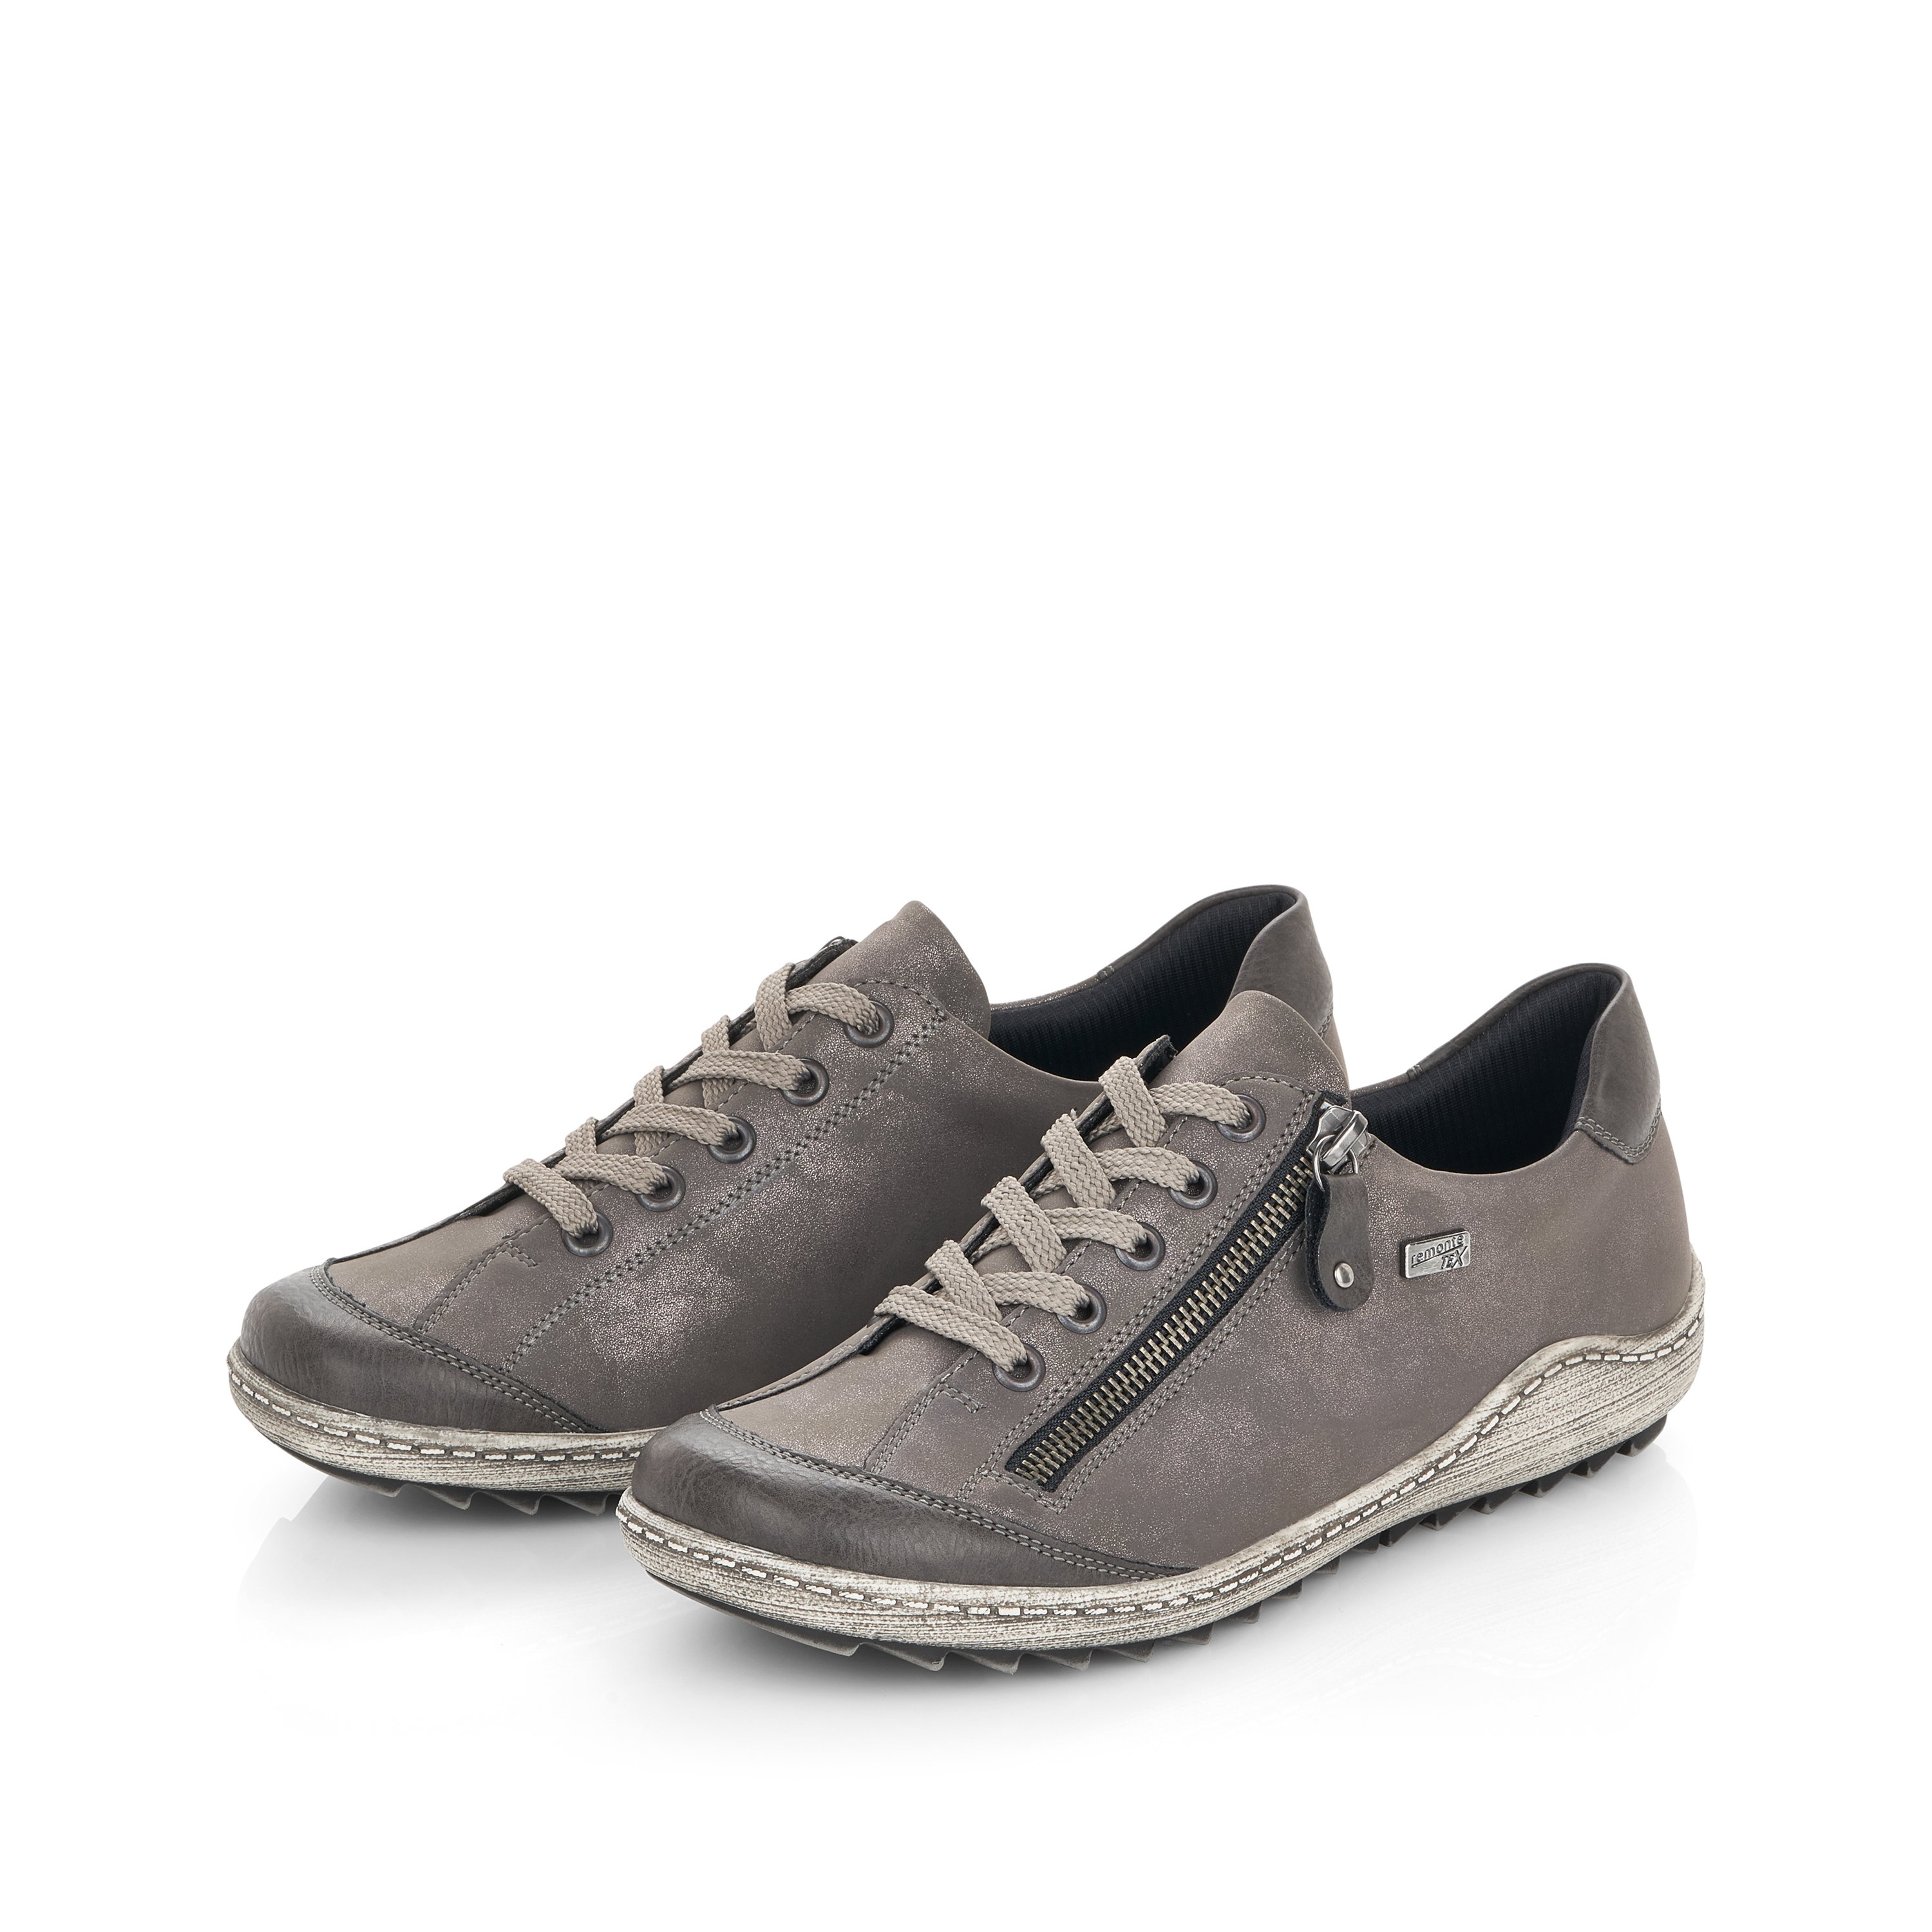 Silver grey remonte women´s lace-up shoes R1402-44 with flexible profile sole. Shoe laterally